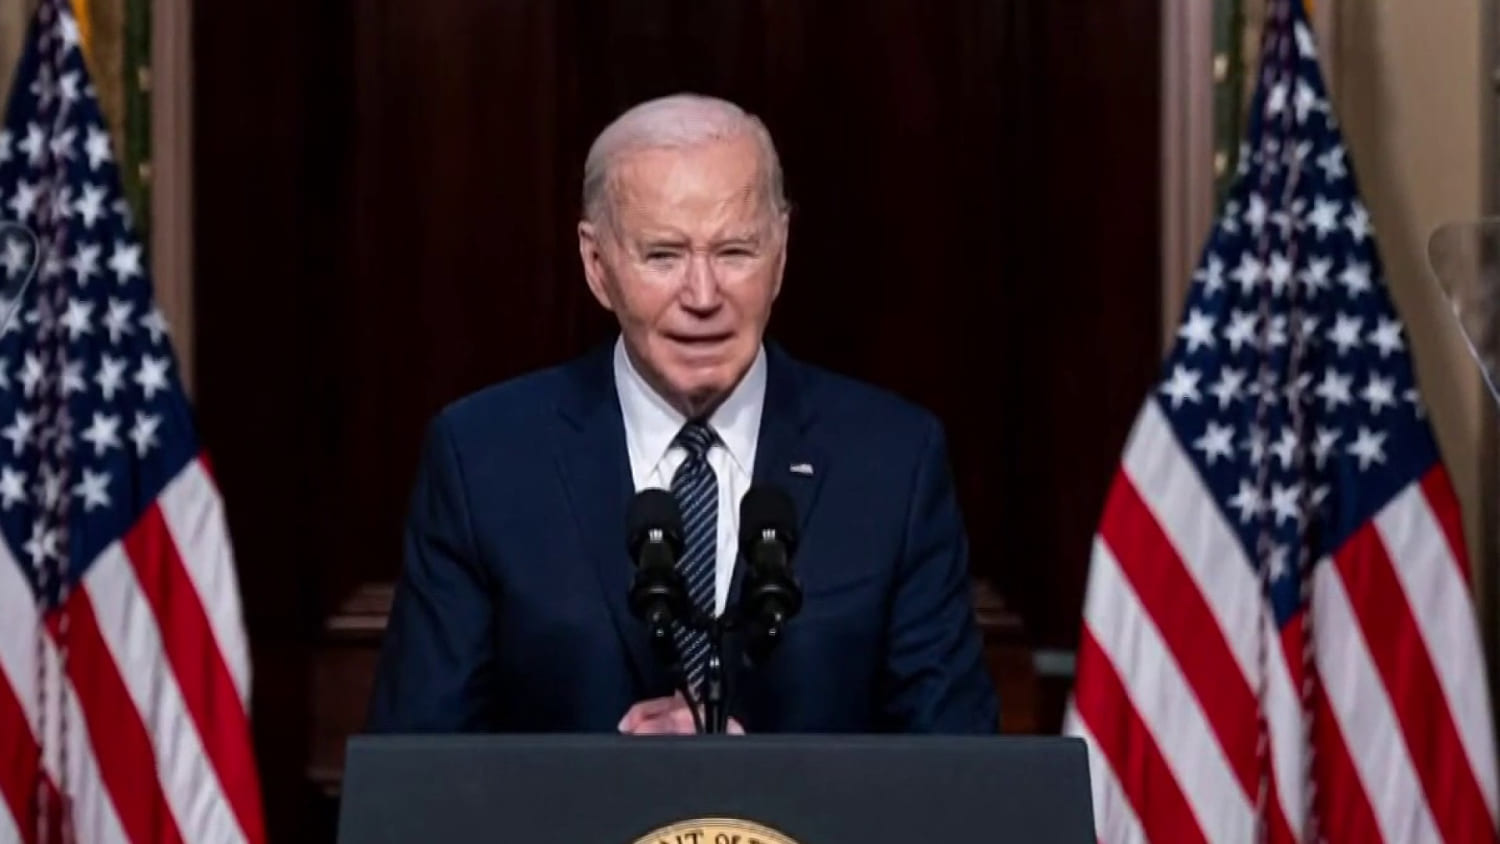 Biden talks to Howard Stern as campaign looks to reach voters